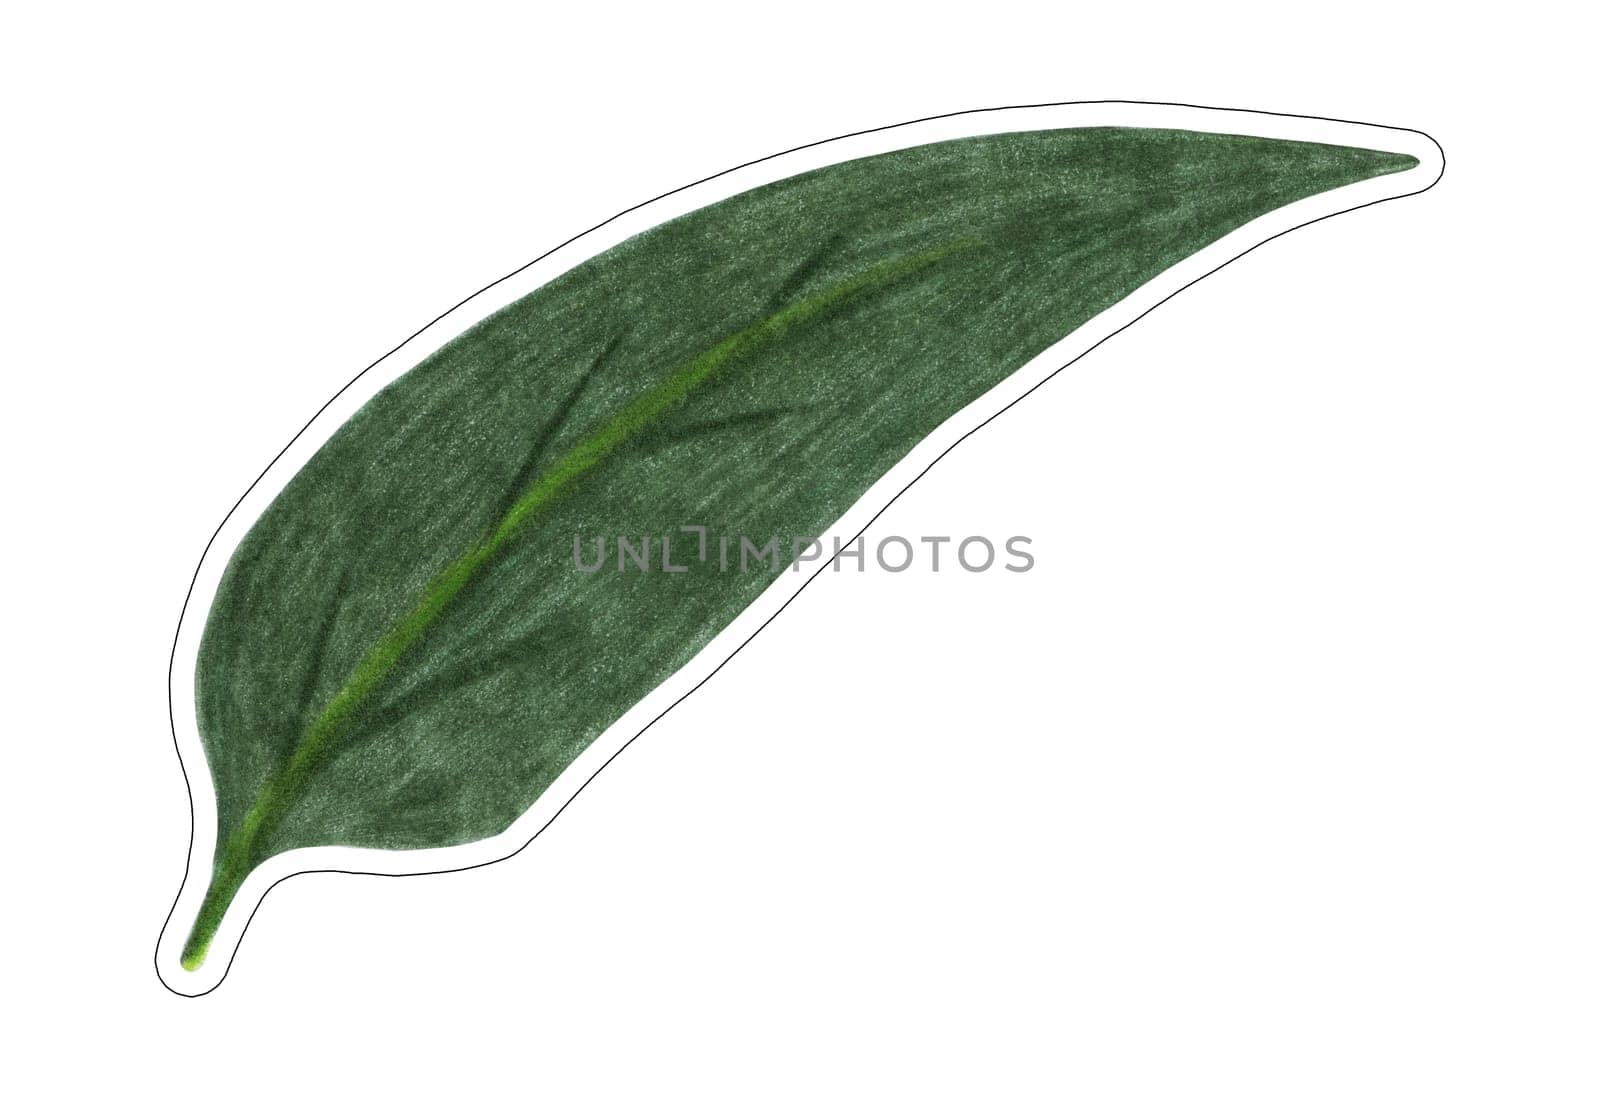 Sticker of Green Leaf of Chrysanthemum Isolated on White Background. Flower Leaf Element Sticker Drawn by Colored Pencil.